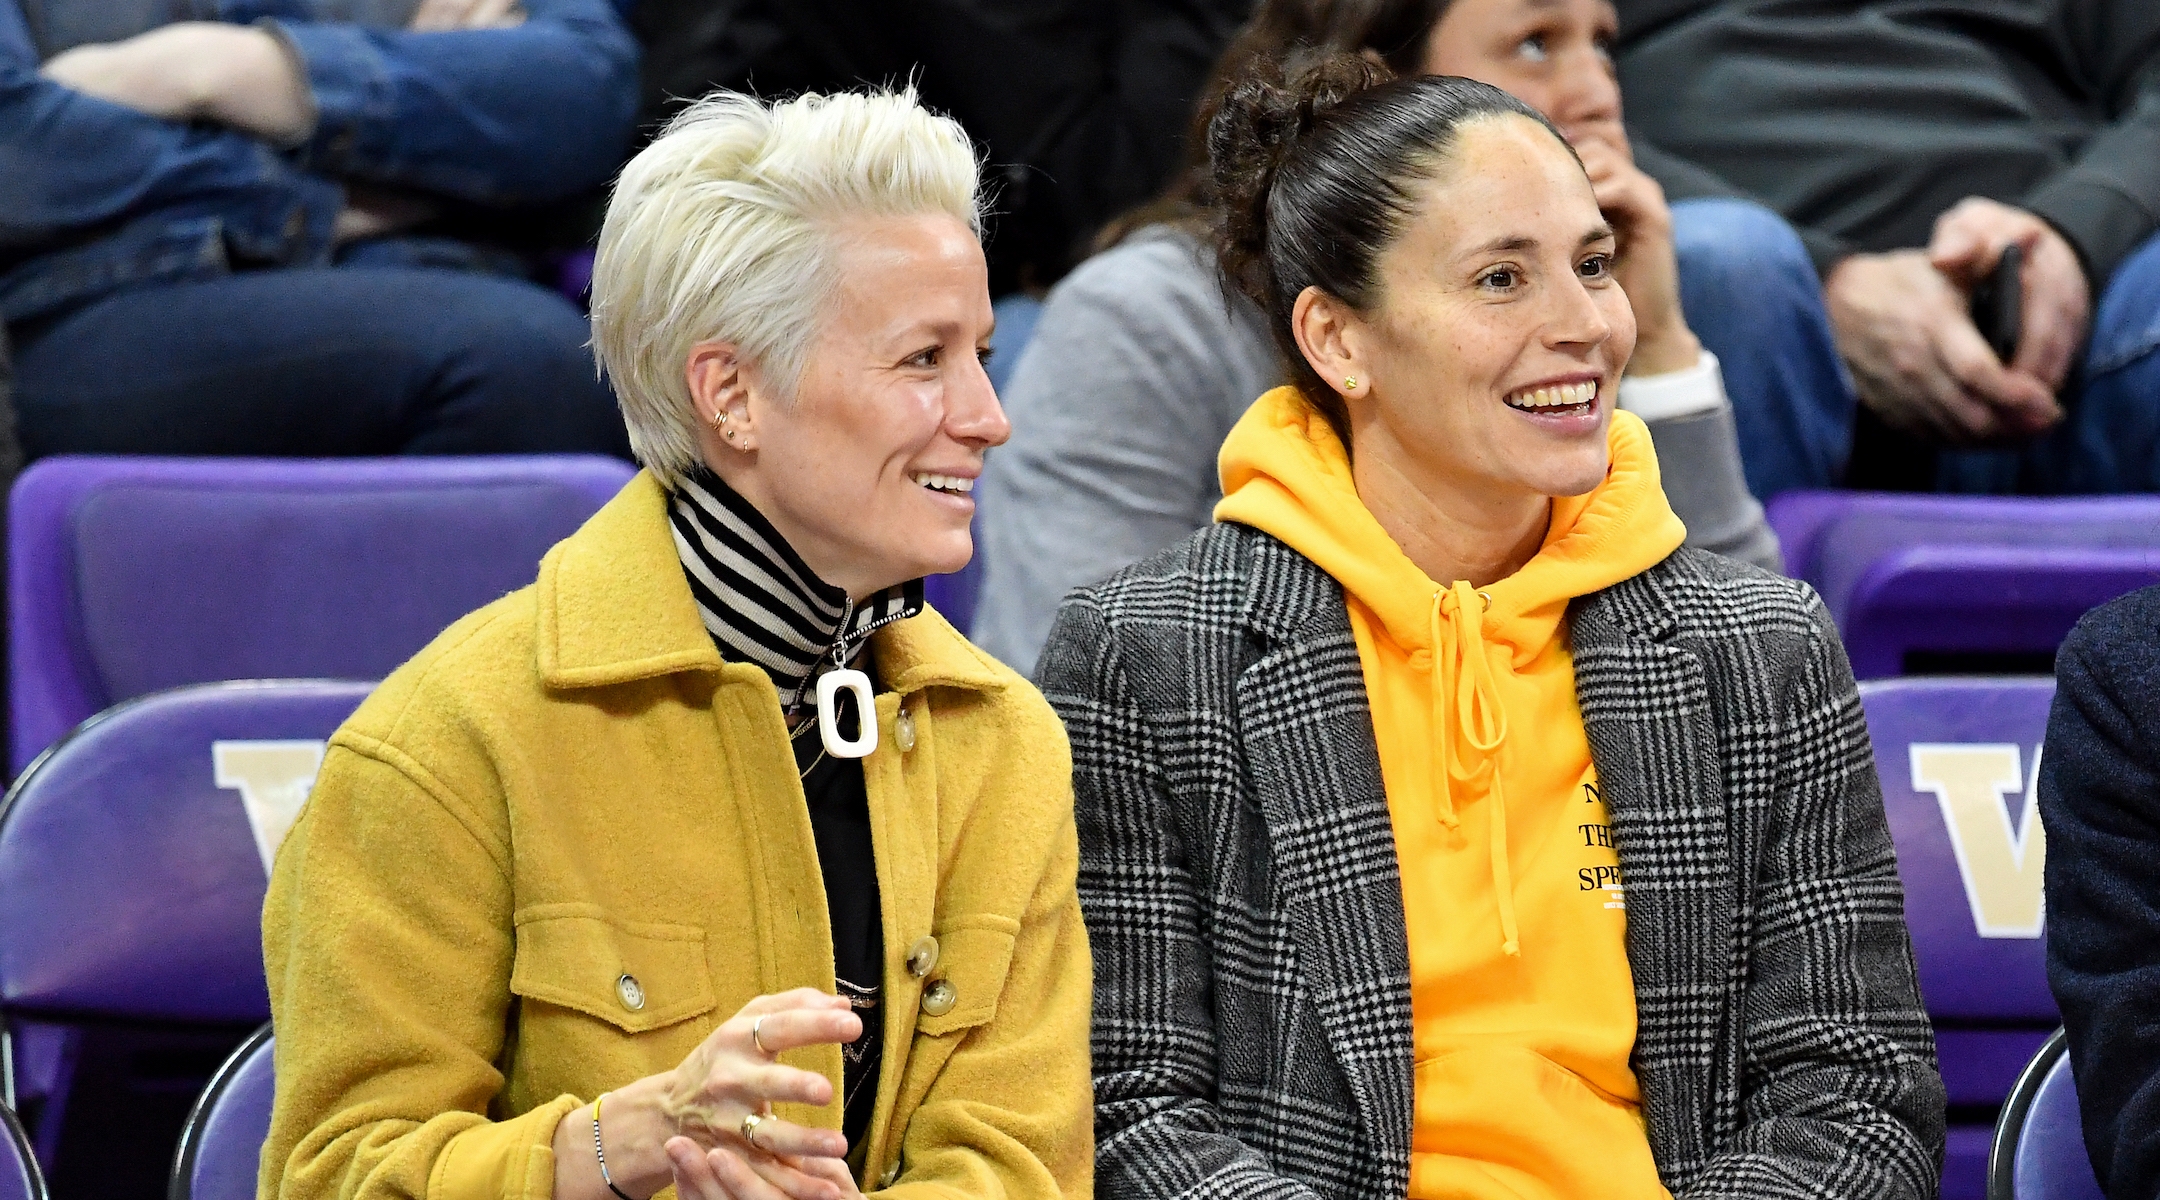 Megan Rapinoe, left, and Sue Bird have been dating since 2016. (Alika Jenner/Getty Images)